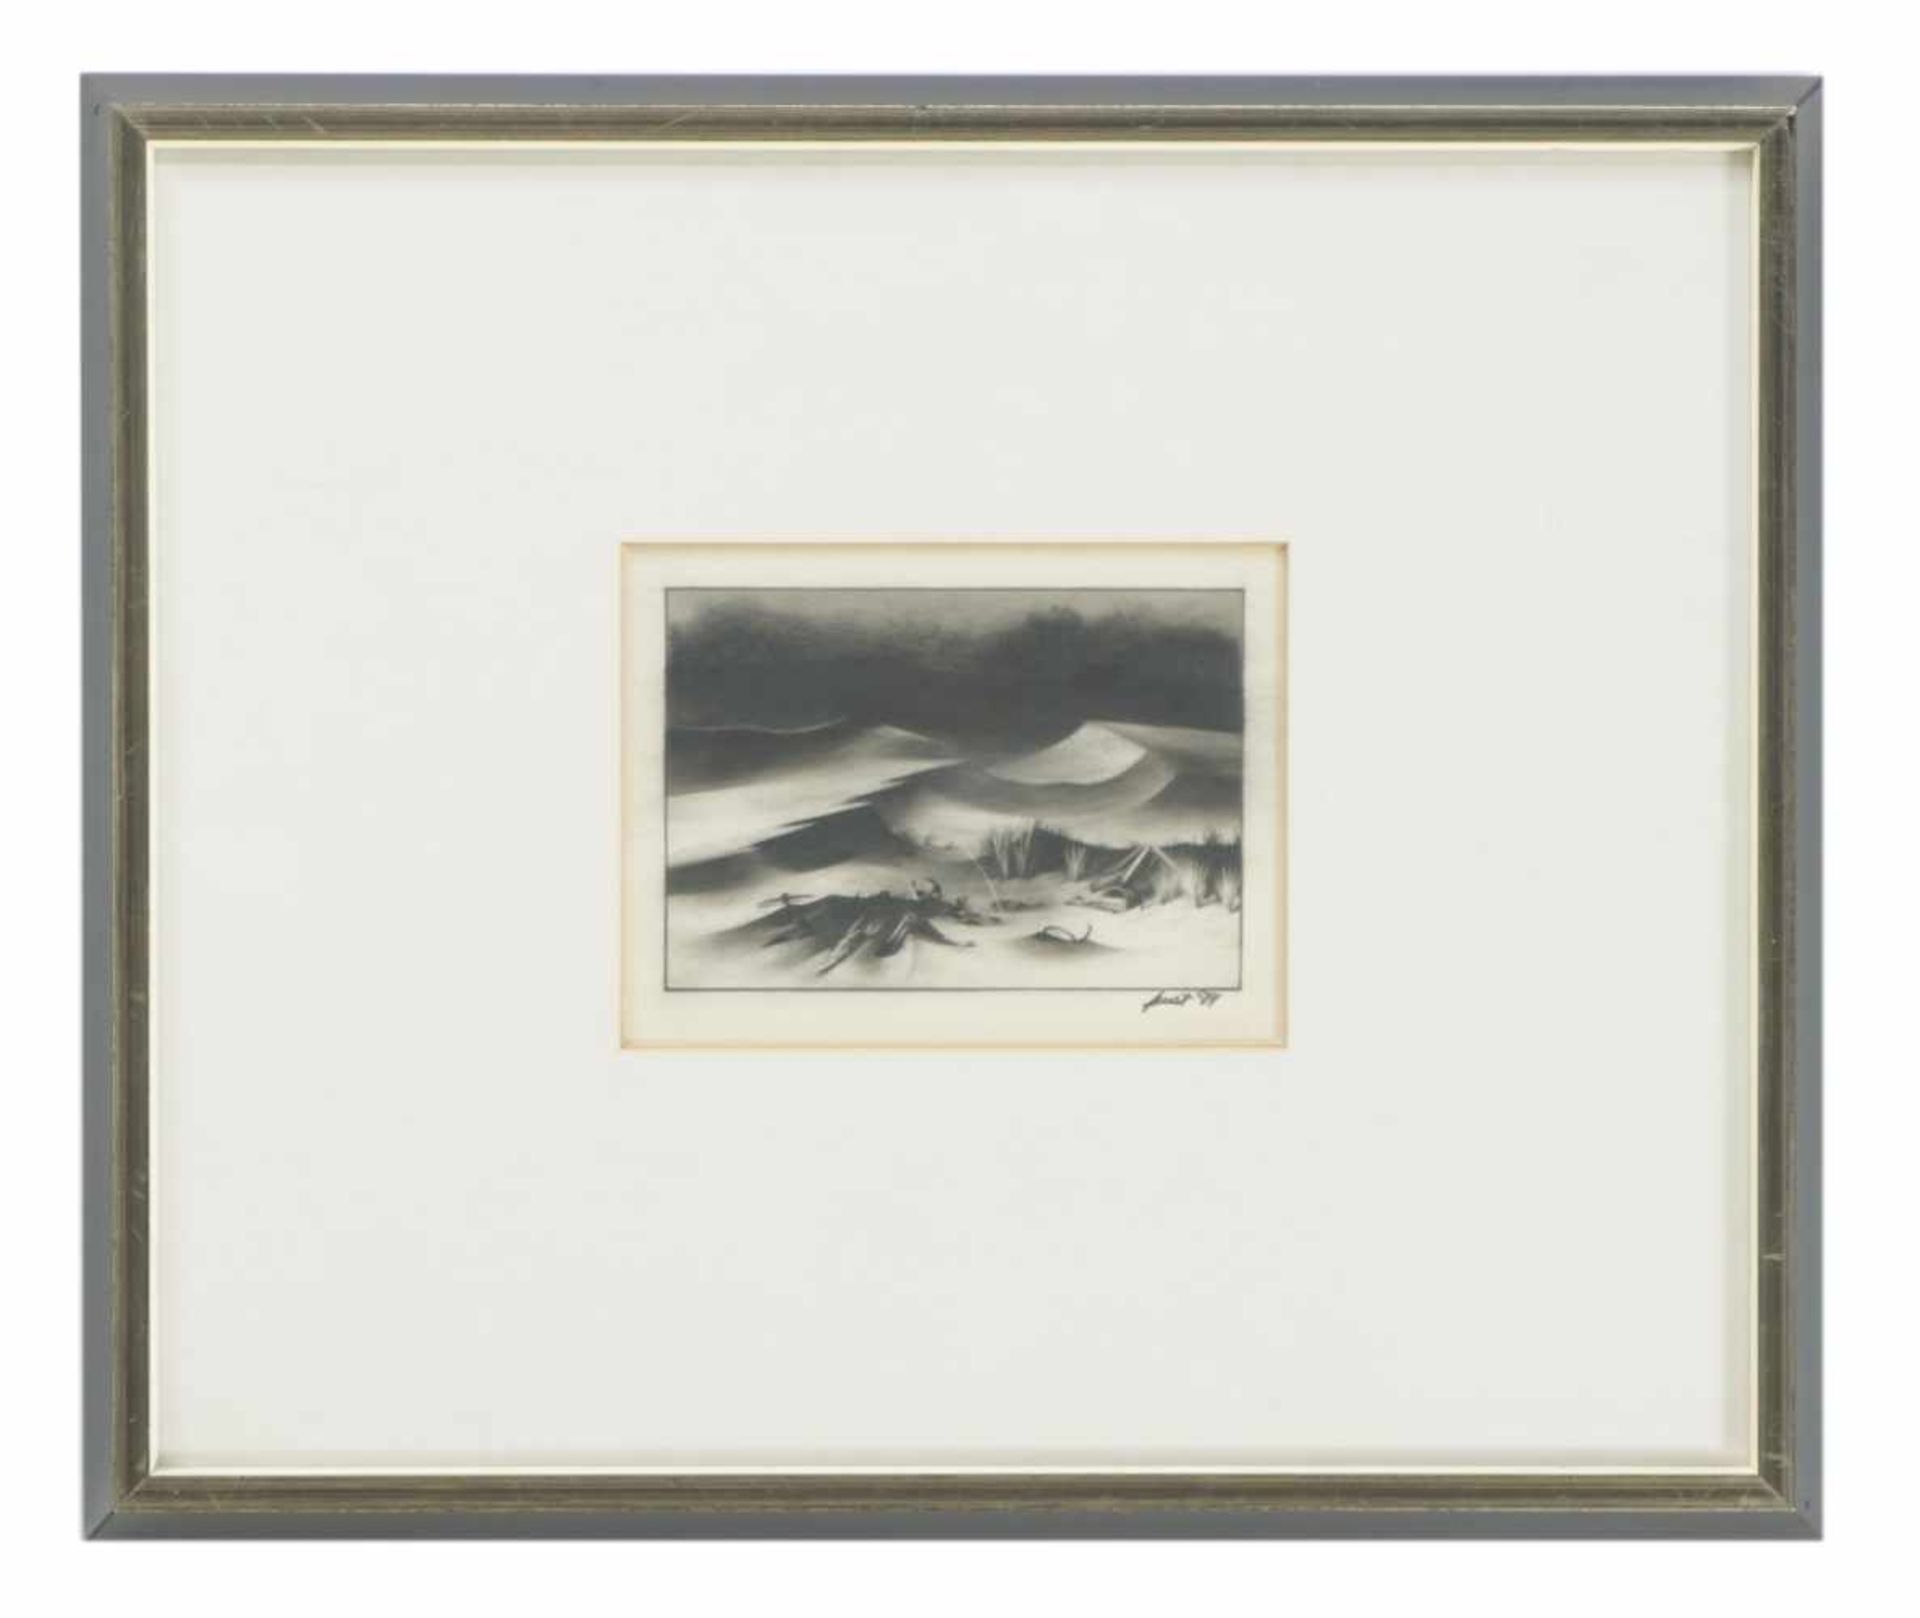 The Underground-Artist Jan Faust, Untitled, Pencil-Drawing, signed and dated (19)79, 9 x - Image 2 of 2